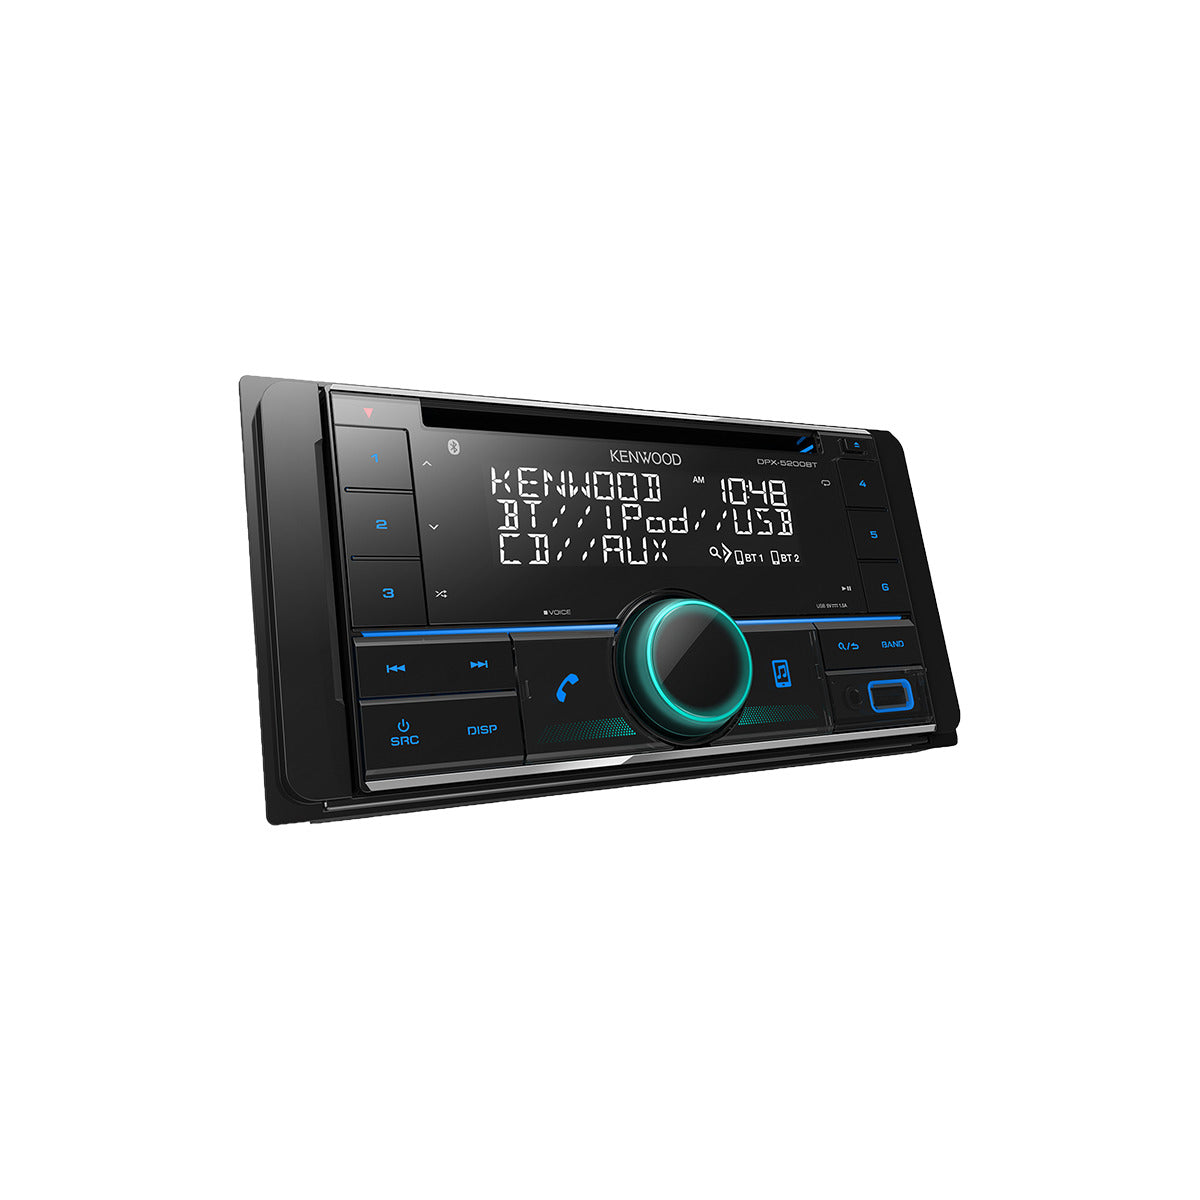 Kenwood DPX-5300BT Dual Bluetooth CD USB AUX  3x Pre Outs Stereo